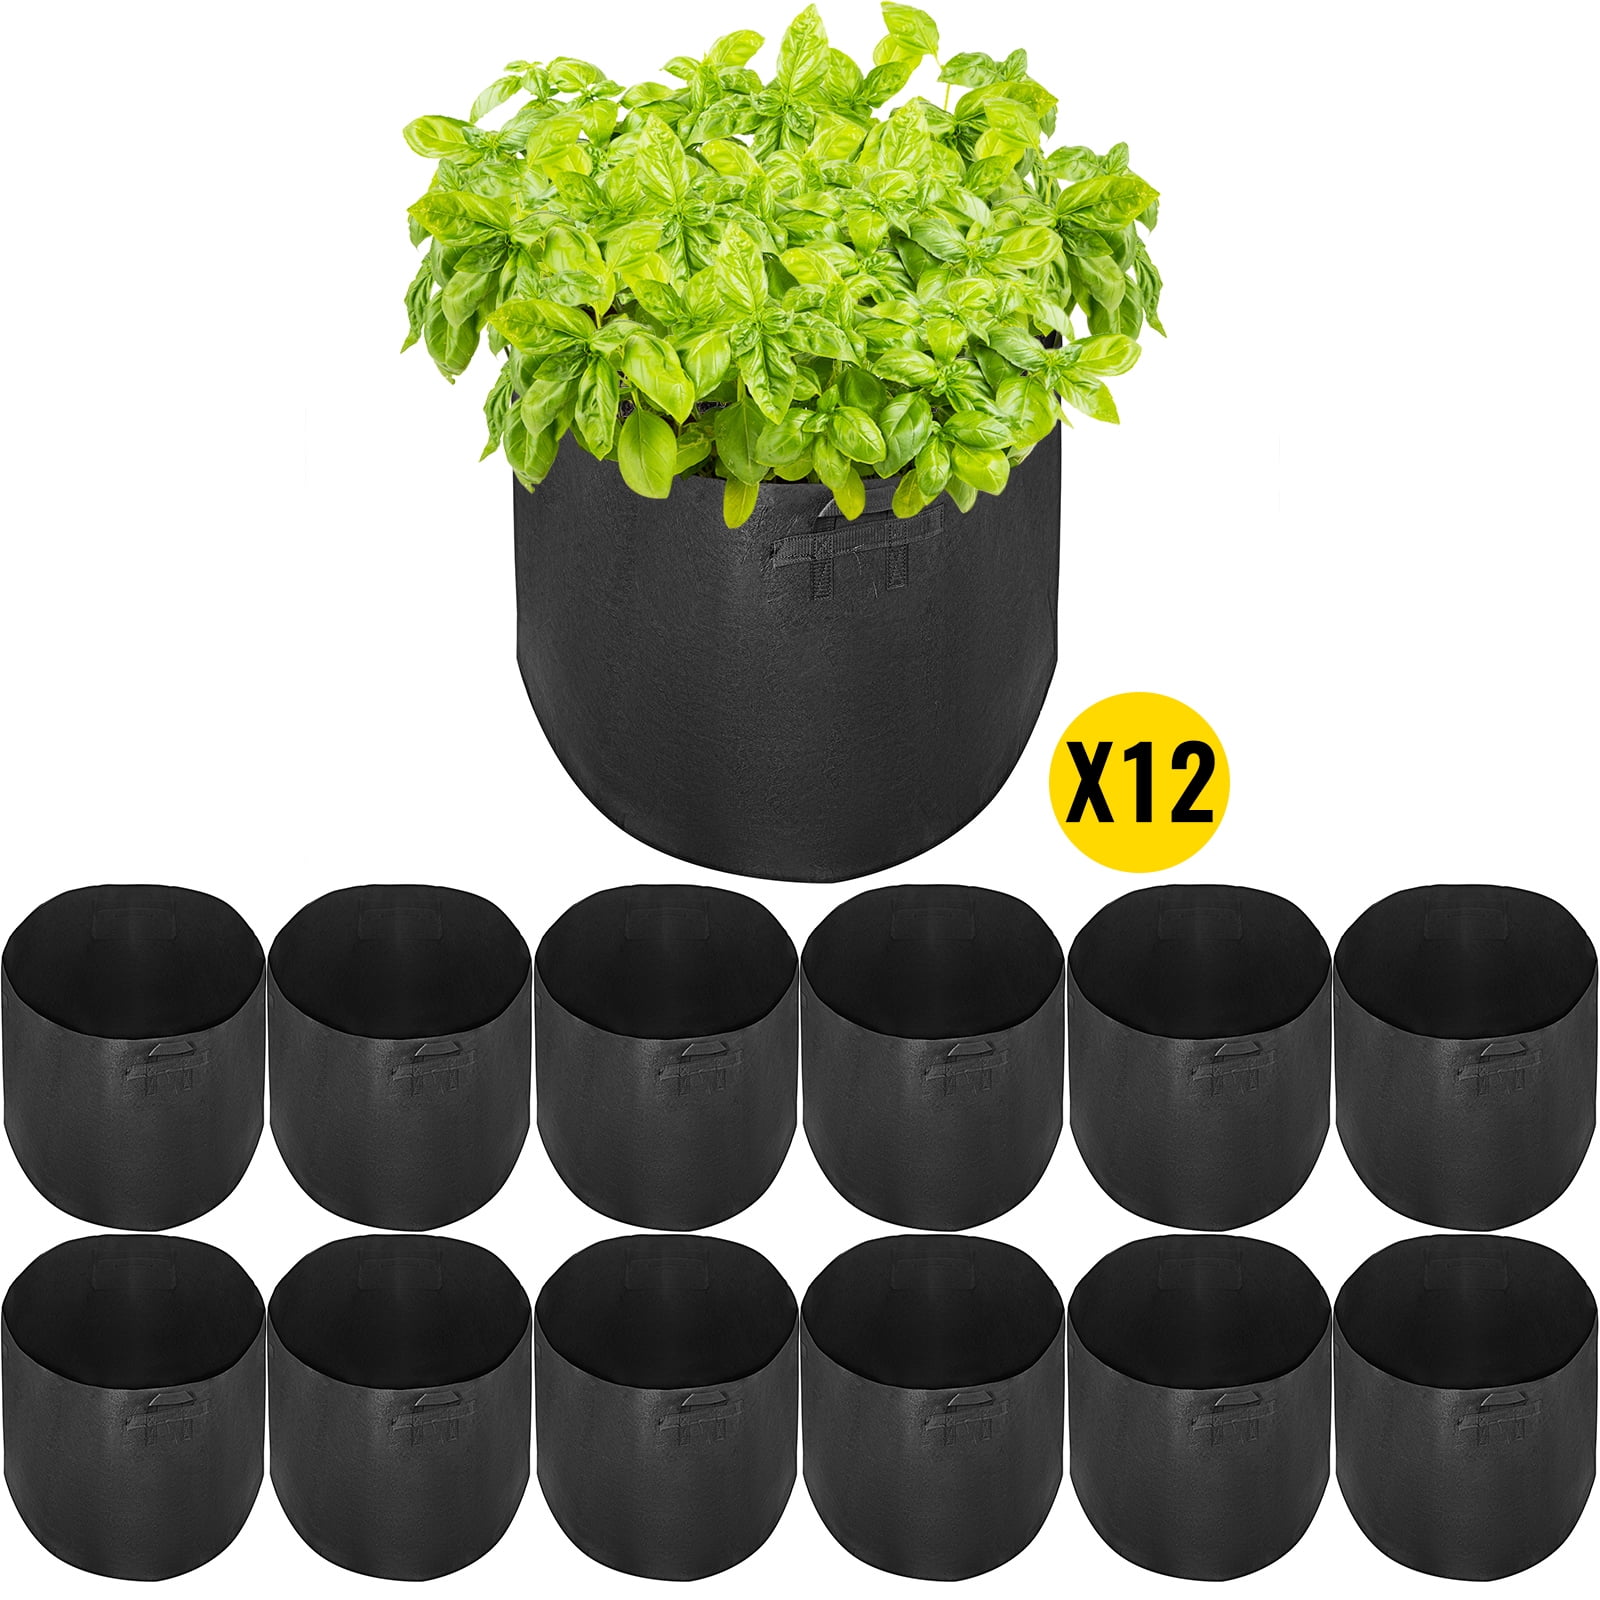 VEVOR Aeration Fabric Pots with Handles 400 gal. Plant Grow Bag Black Grow Bag Plant Container for Garden Planting (5-Pack)